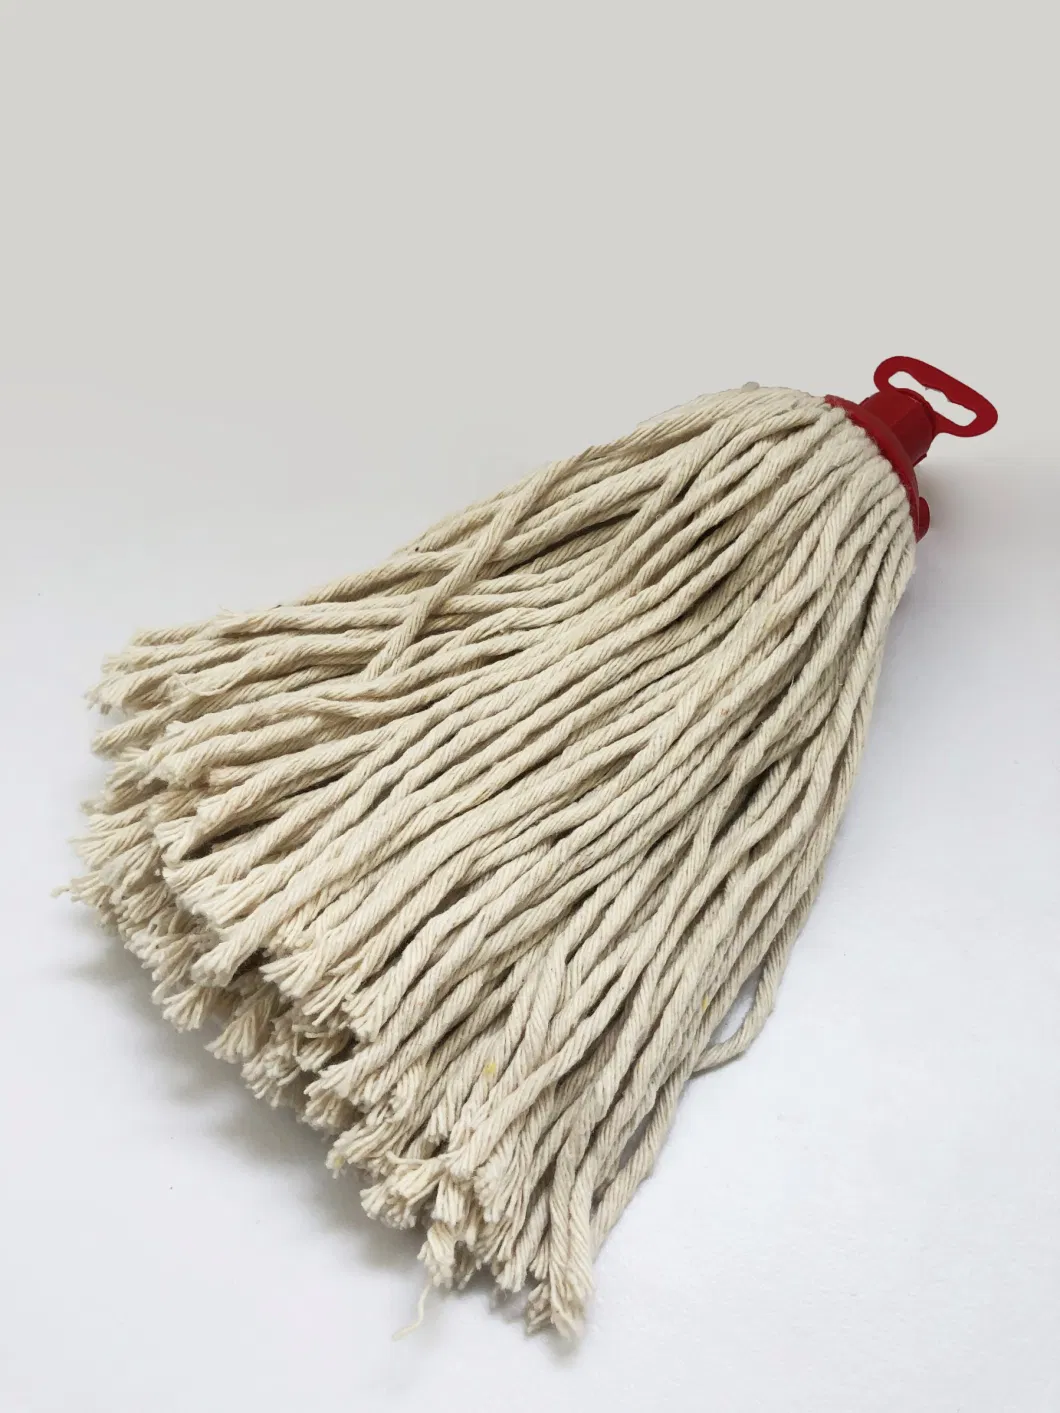 Wholesales Price Cotton Mop Natural White Mop Head 200 Grams In70% Cotton&30% Polyester Cotton Yarn 12ply for All Floor Cleaning